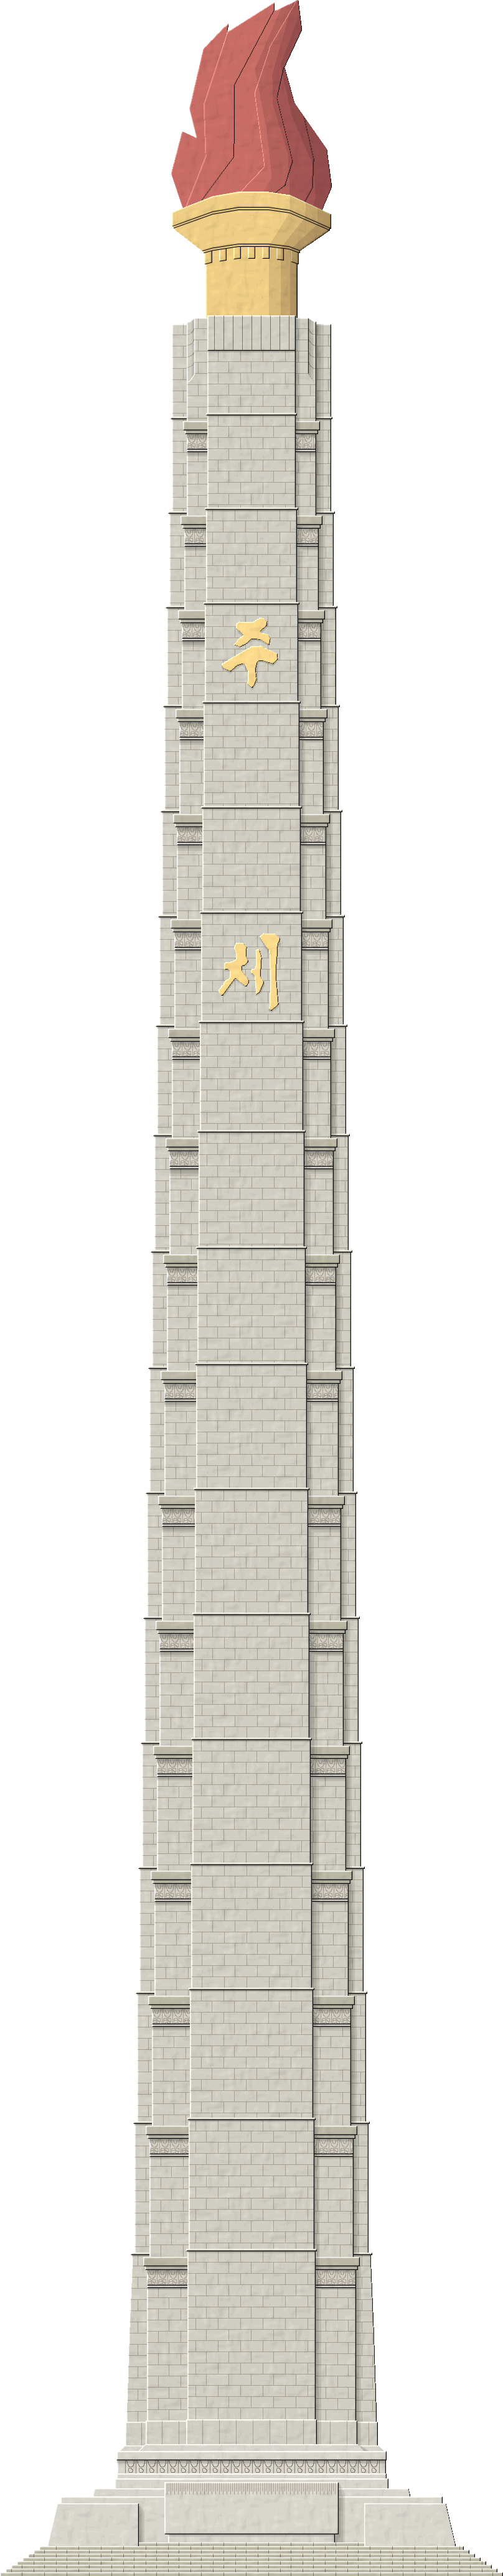 tower clipart architectural